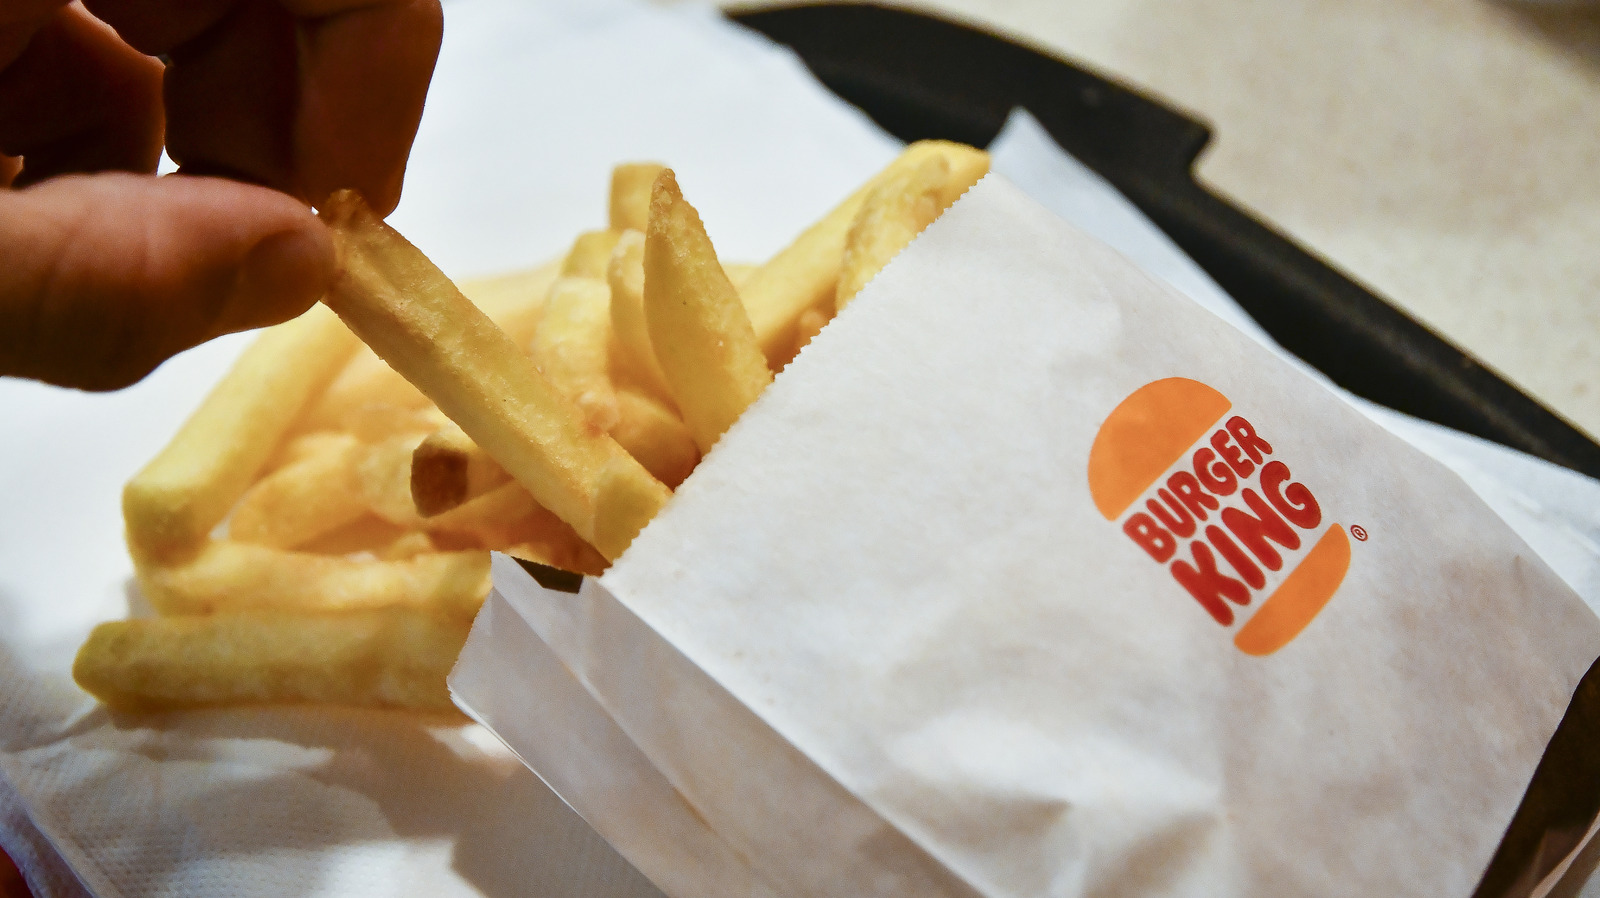 Bankrupt franchisee Burger King is offloading nearly 6 stores